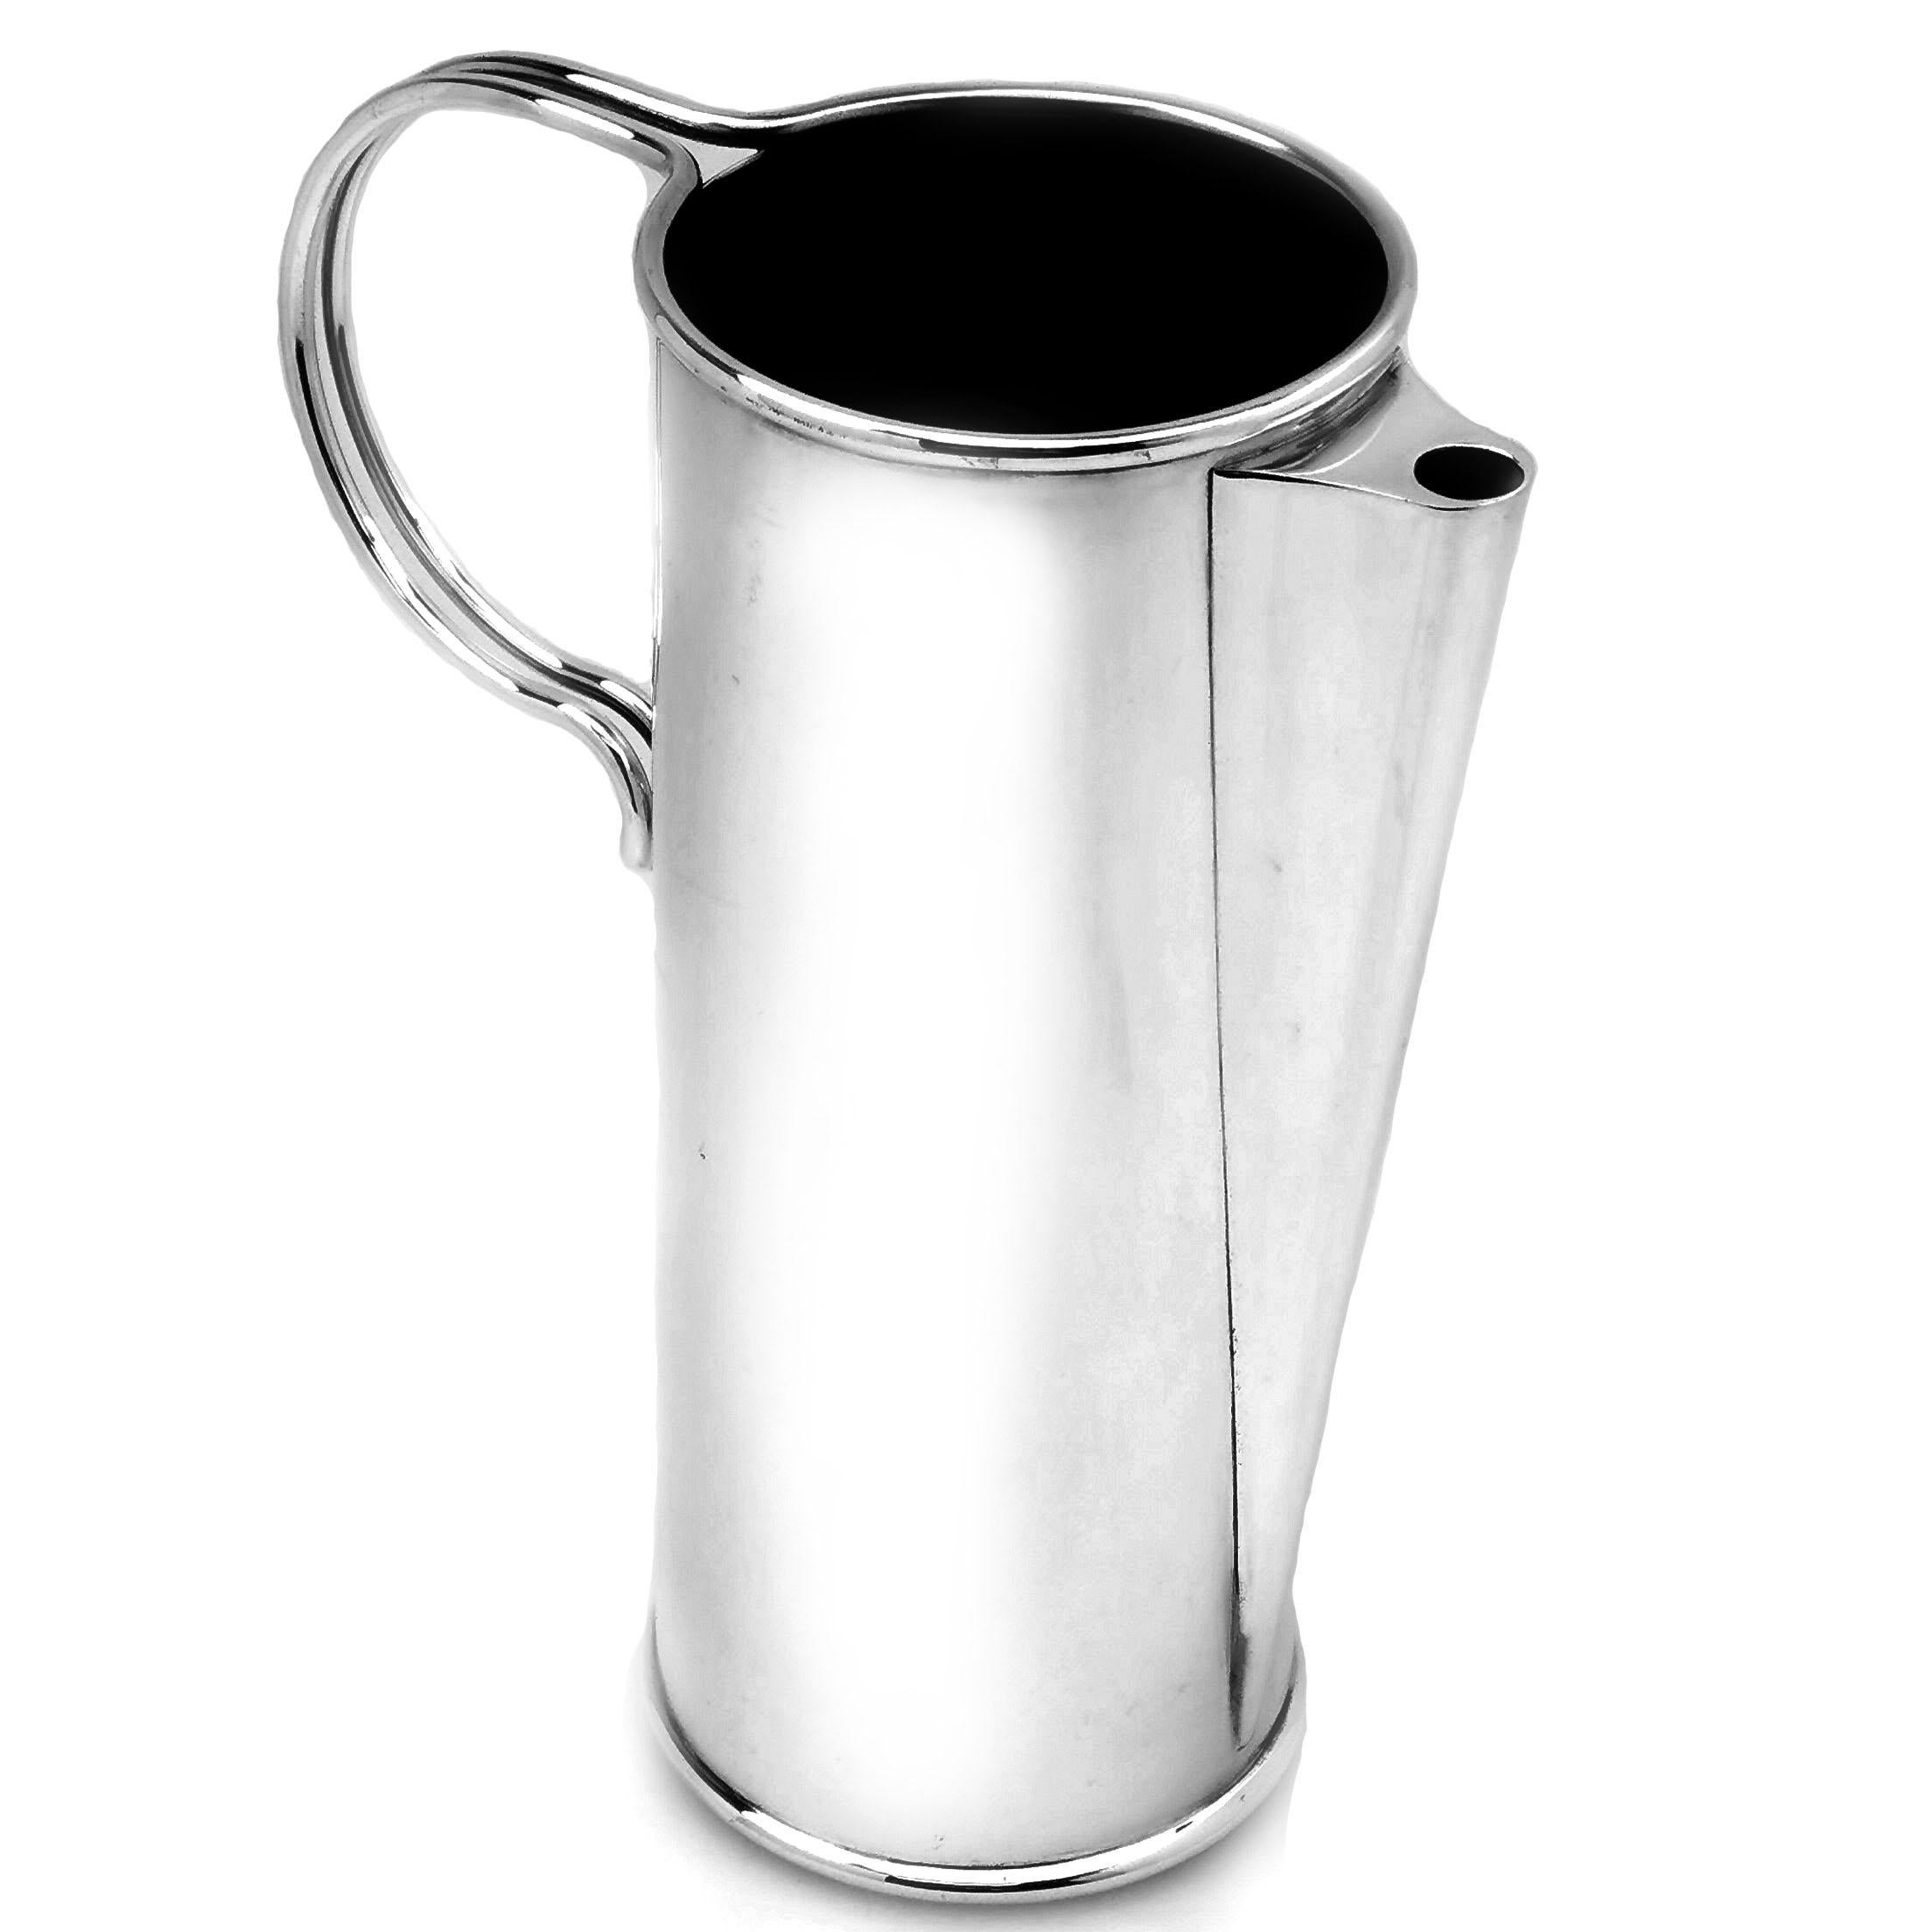 A stylish Vintage Italian Jug with an understated elegant straight sided design displaying the luster of plain polished silver. The Jug has subtle spout which has a straight geometric line from the base and a understated handle and is a wonderful